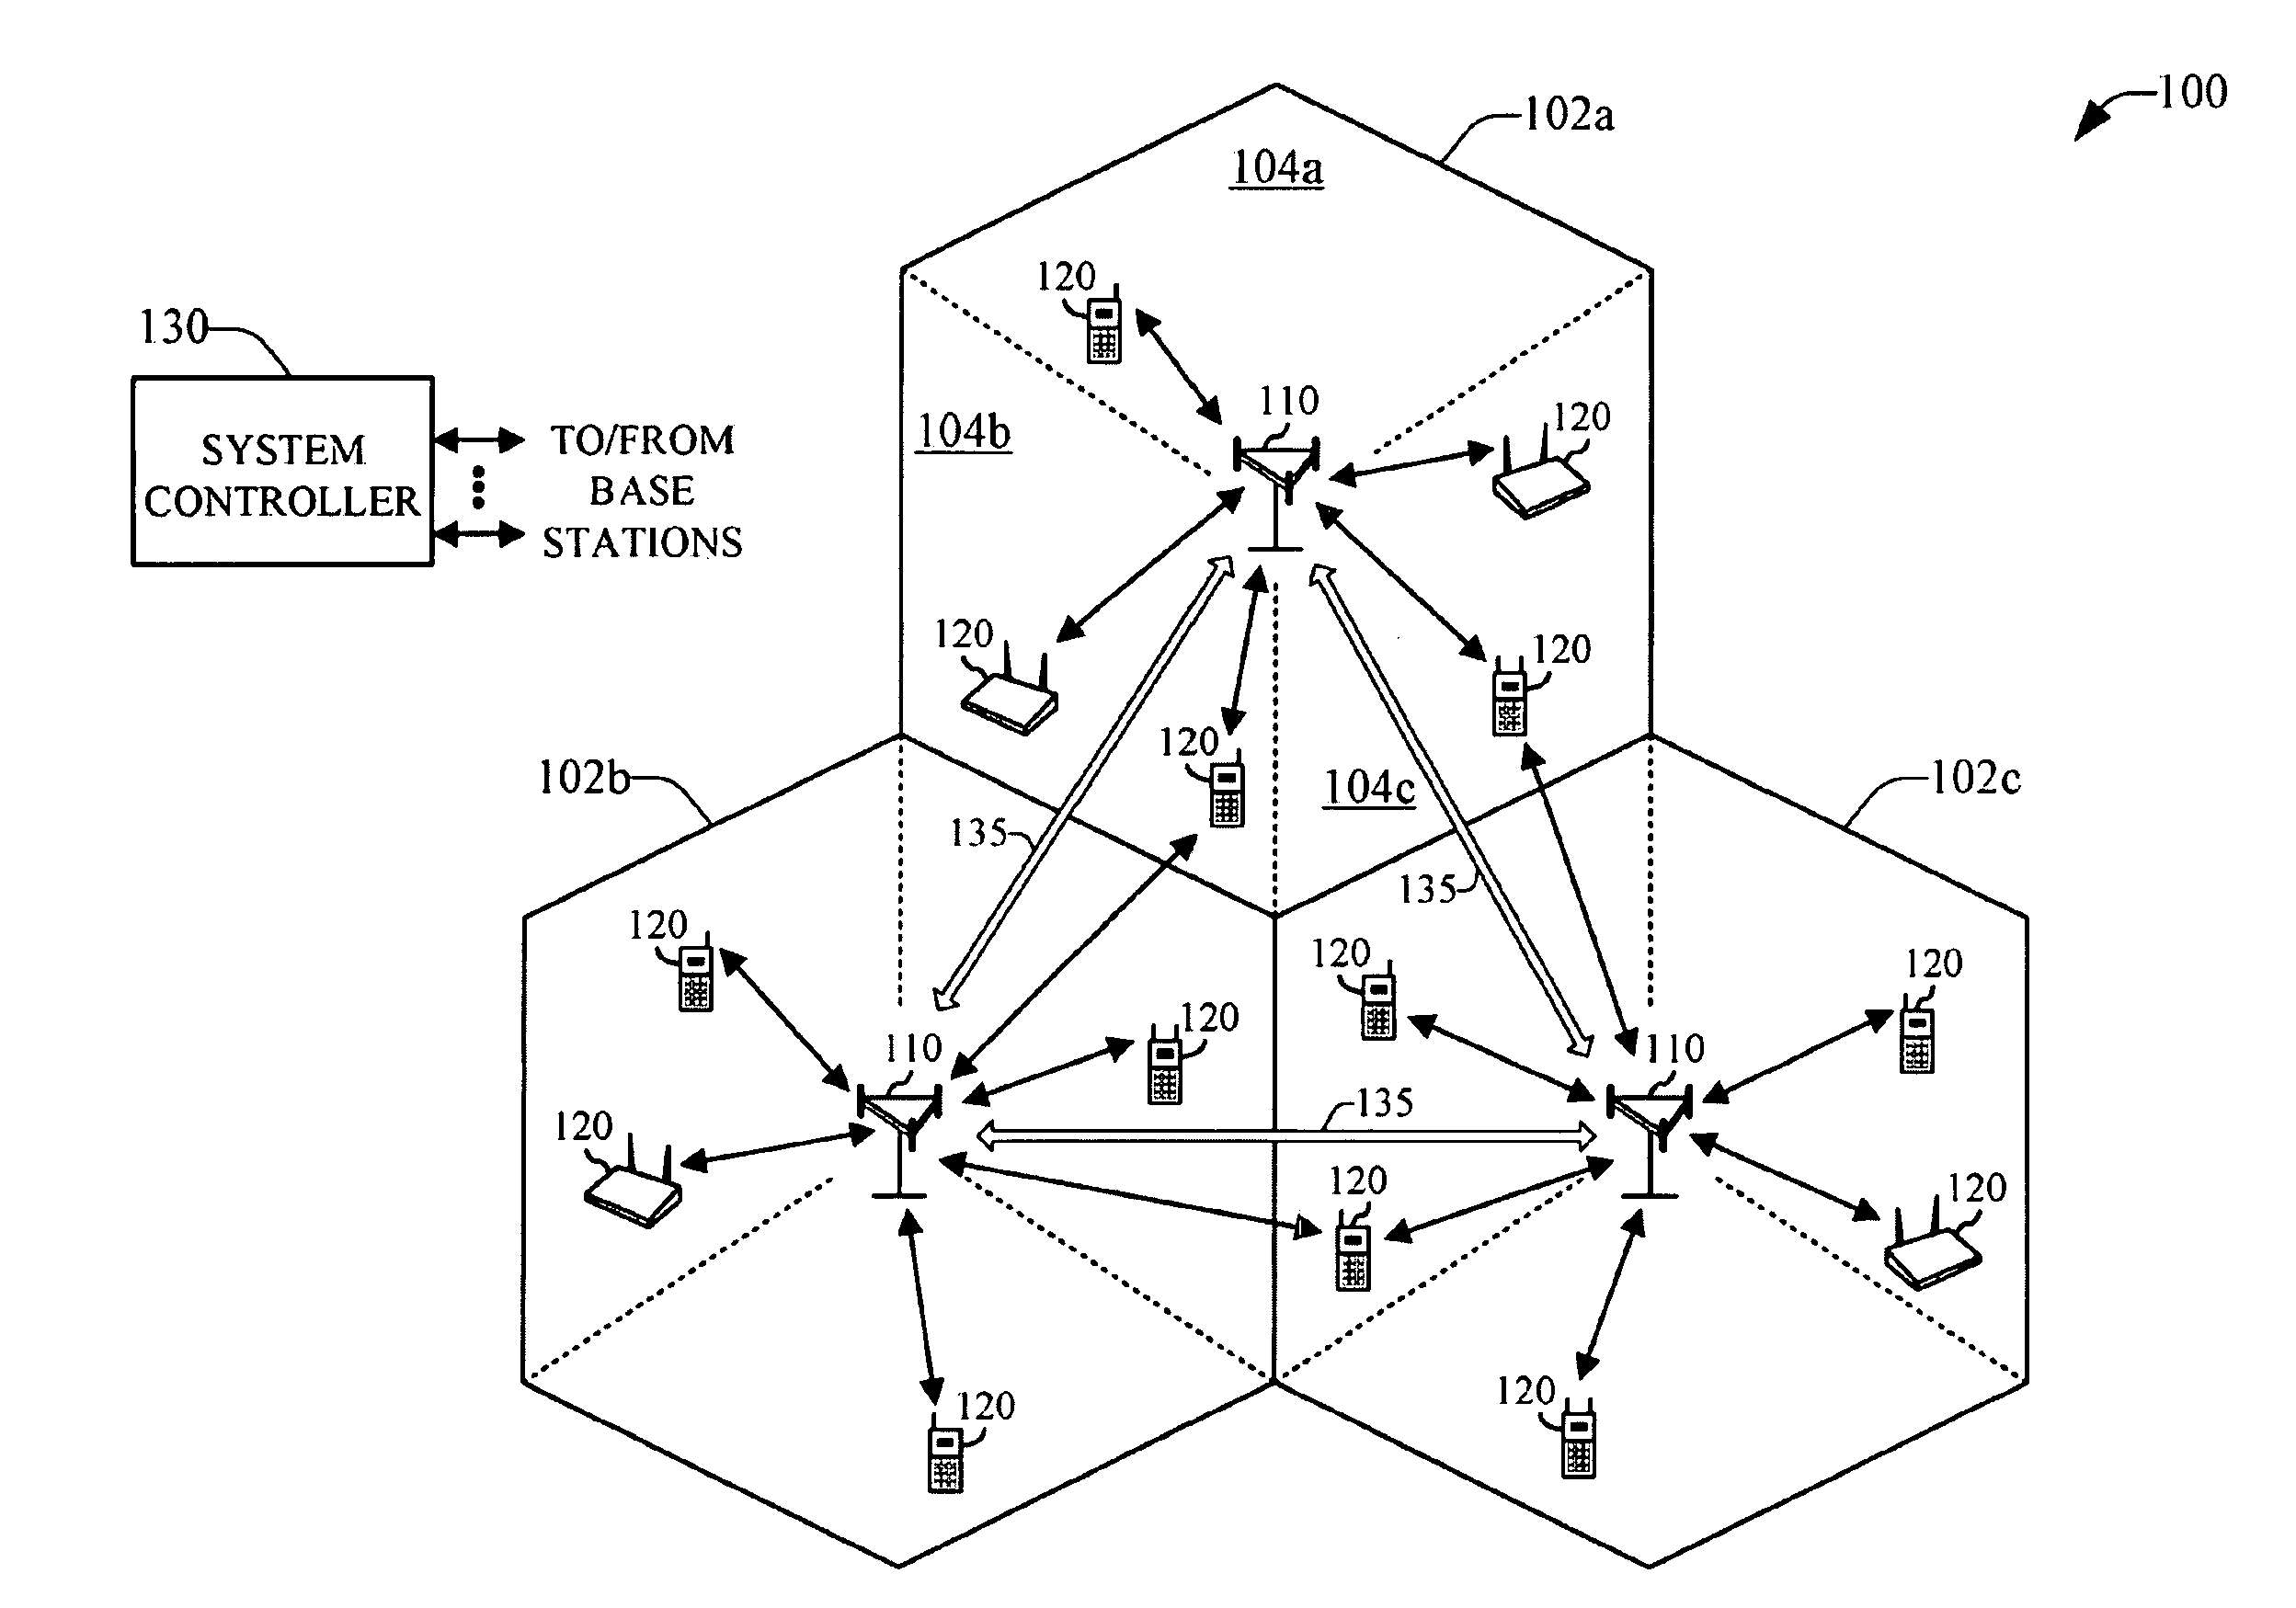 Method and system for reducing backhaul utilization during base station handoff in wireless networks